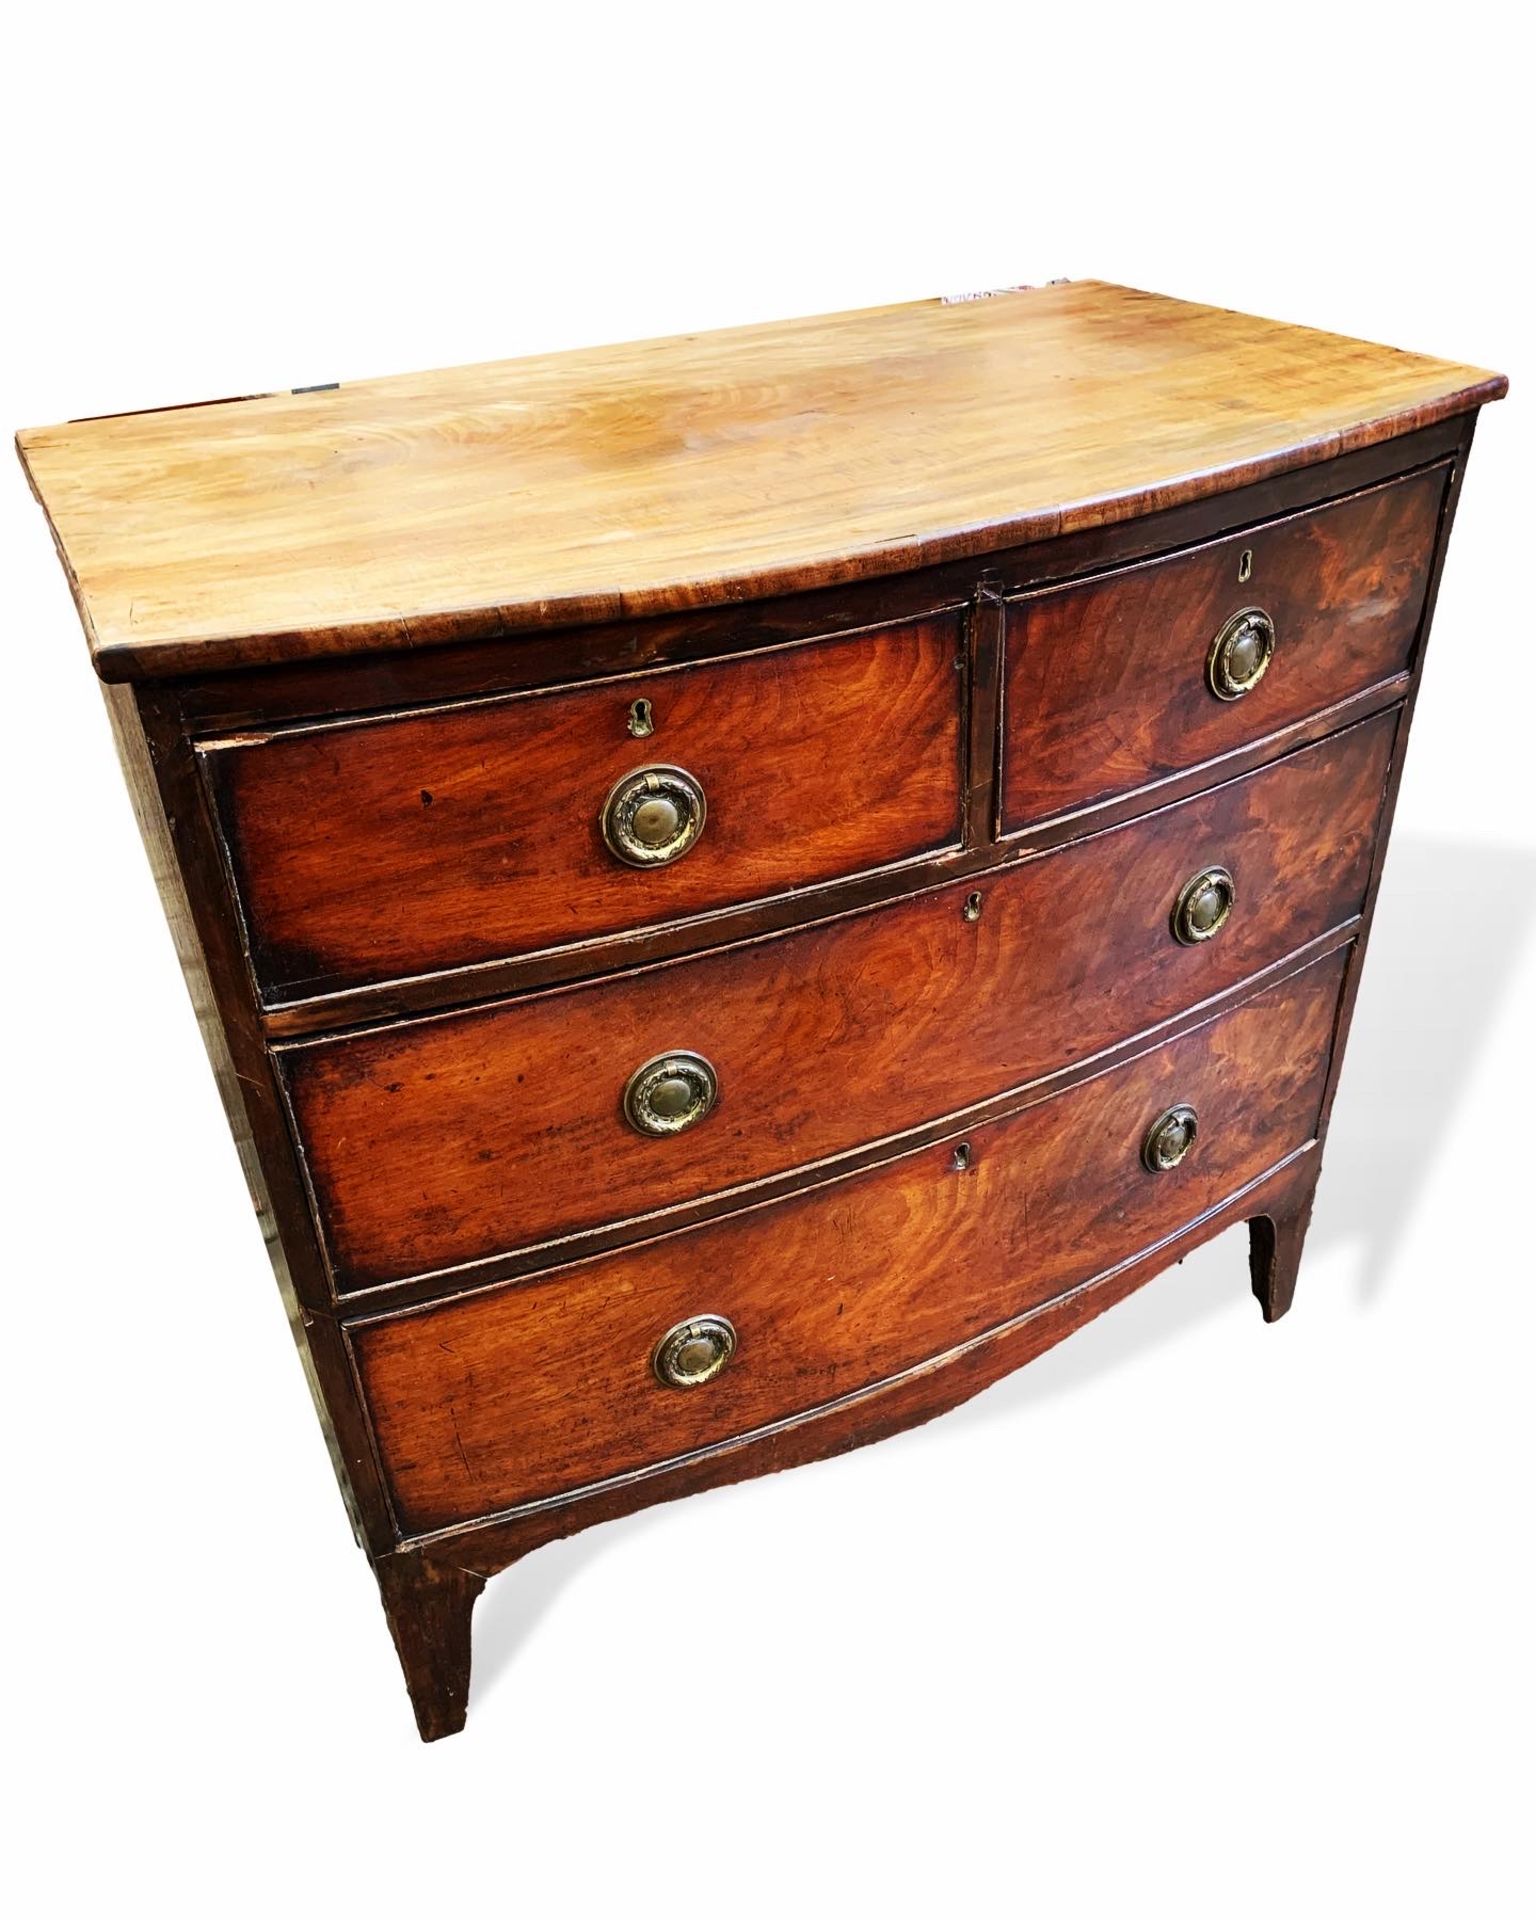 Victorian mahogany bow fronted chest of drawers - Image 4 of 4